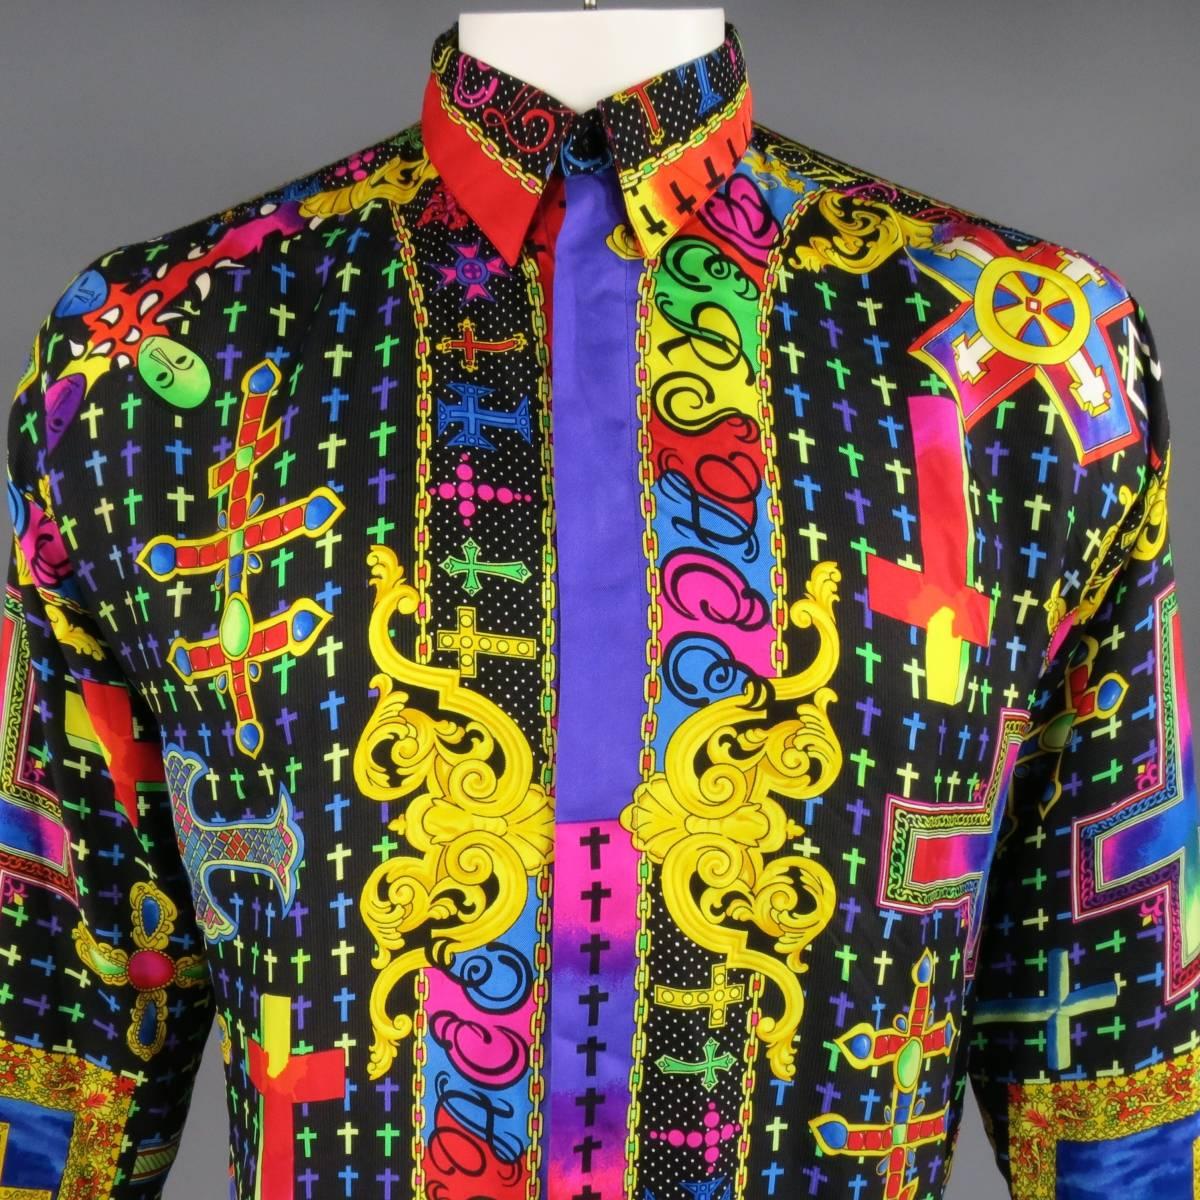 VINTAGE GIANNI VERSACE Long Sleeve Shirt consists of silk material in a multi-color tone. Designed with a button-down double layer collar, hidden button trim and iconic VERSACE print throughout shit. Detailed with multi-colored crosses, novelty gold